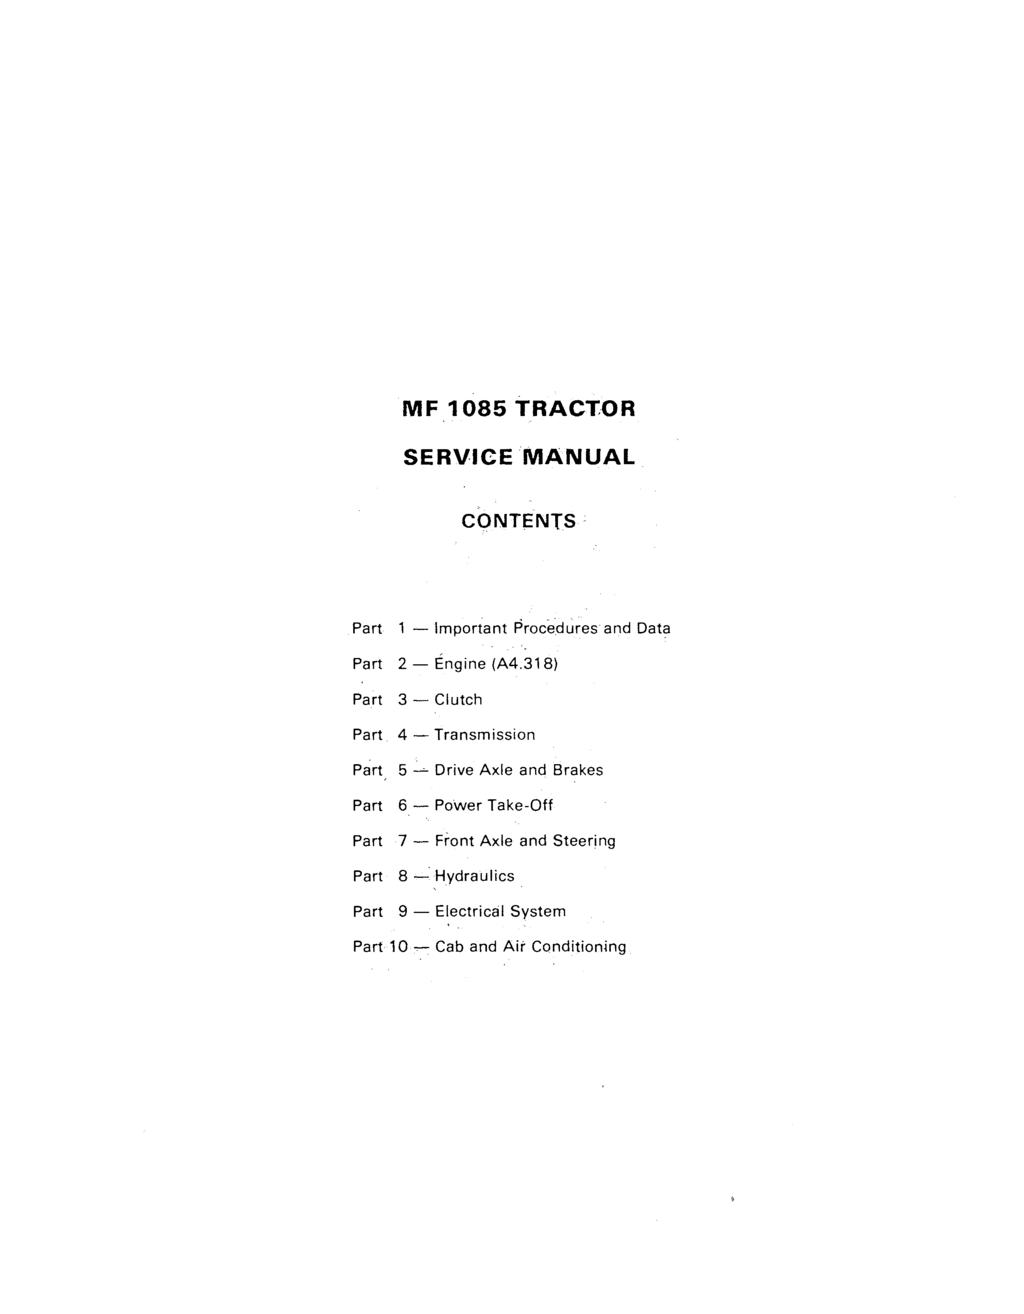 MF 1085 TRACTOR SERVICE MANUAL CONTENTS Part 1 - Important Procedures and Data Part 2 - Part 3 - Part 4 - Engine (A4.